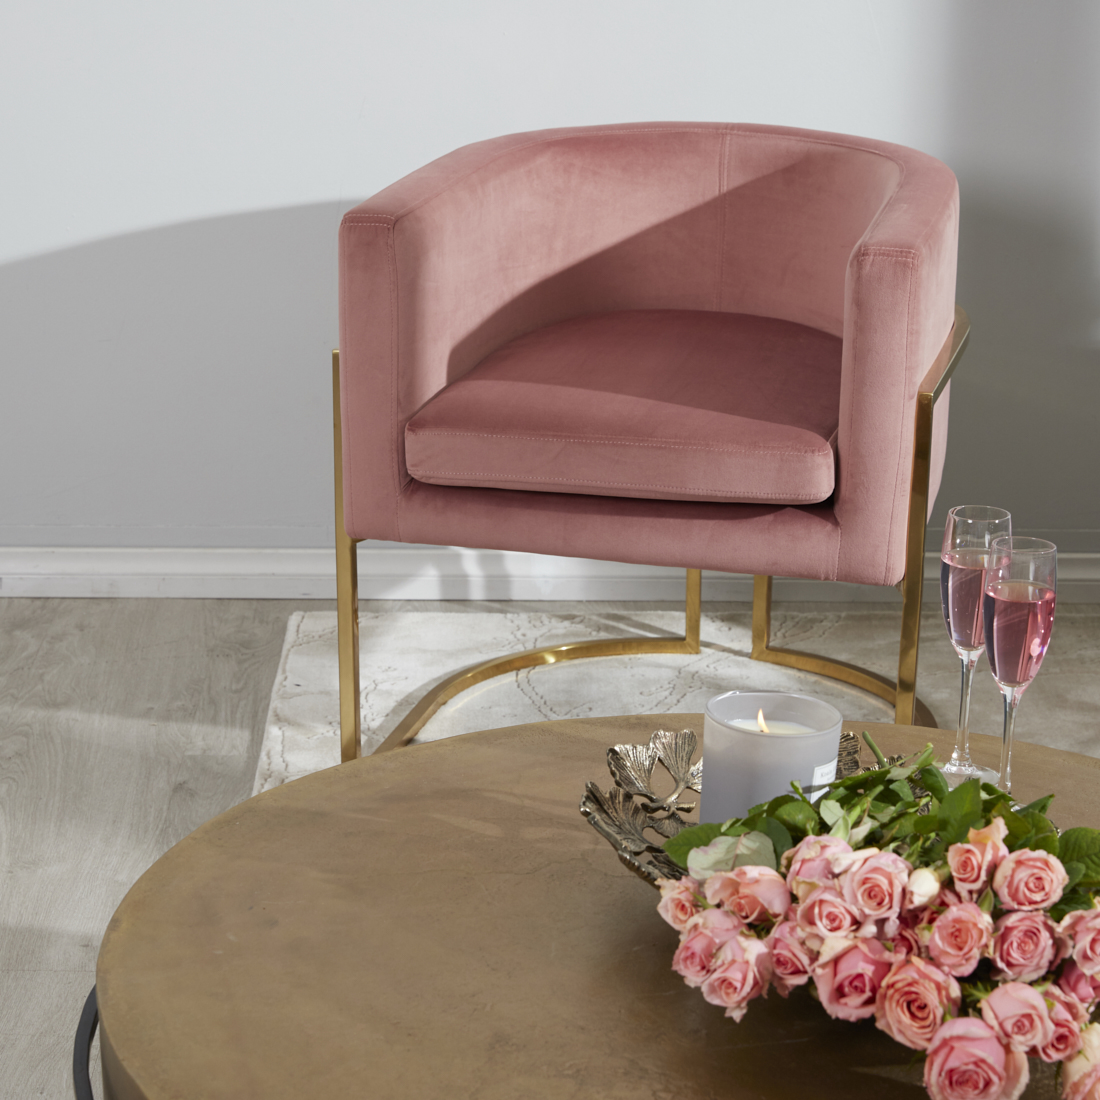 Ways to Style your Home for Valentine's Day